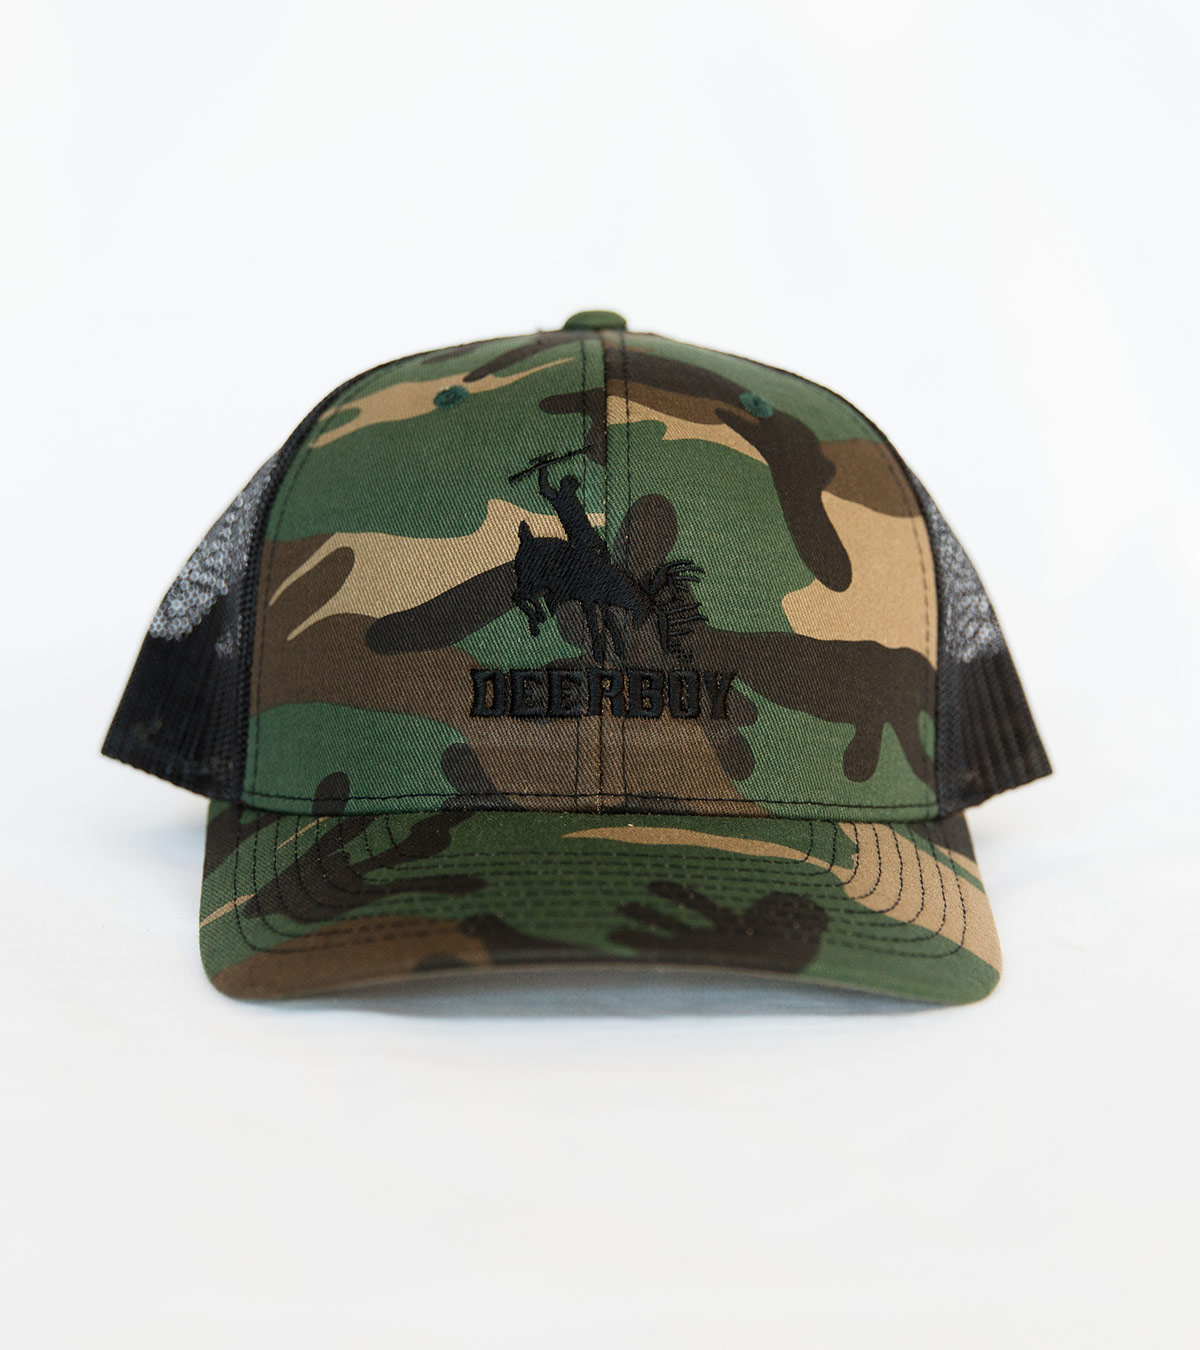 Deerboy Signature Cap Rifle Logo In Camo And Black Front